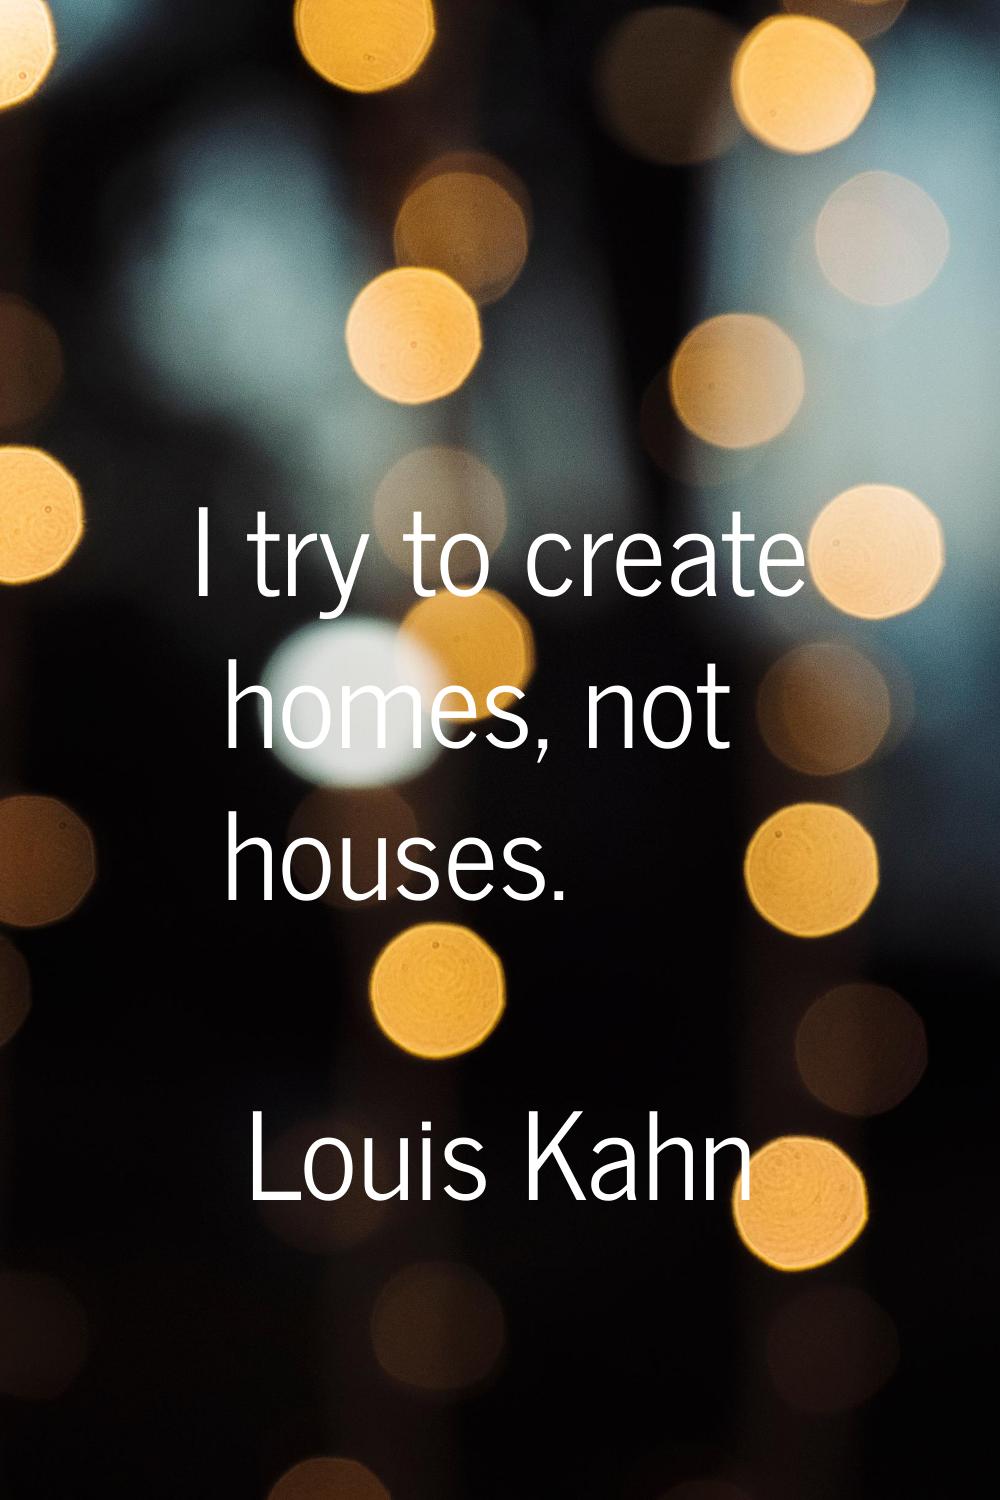 I try to create homes, not houses.